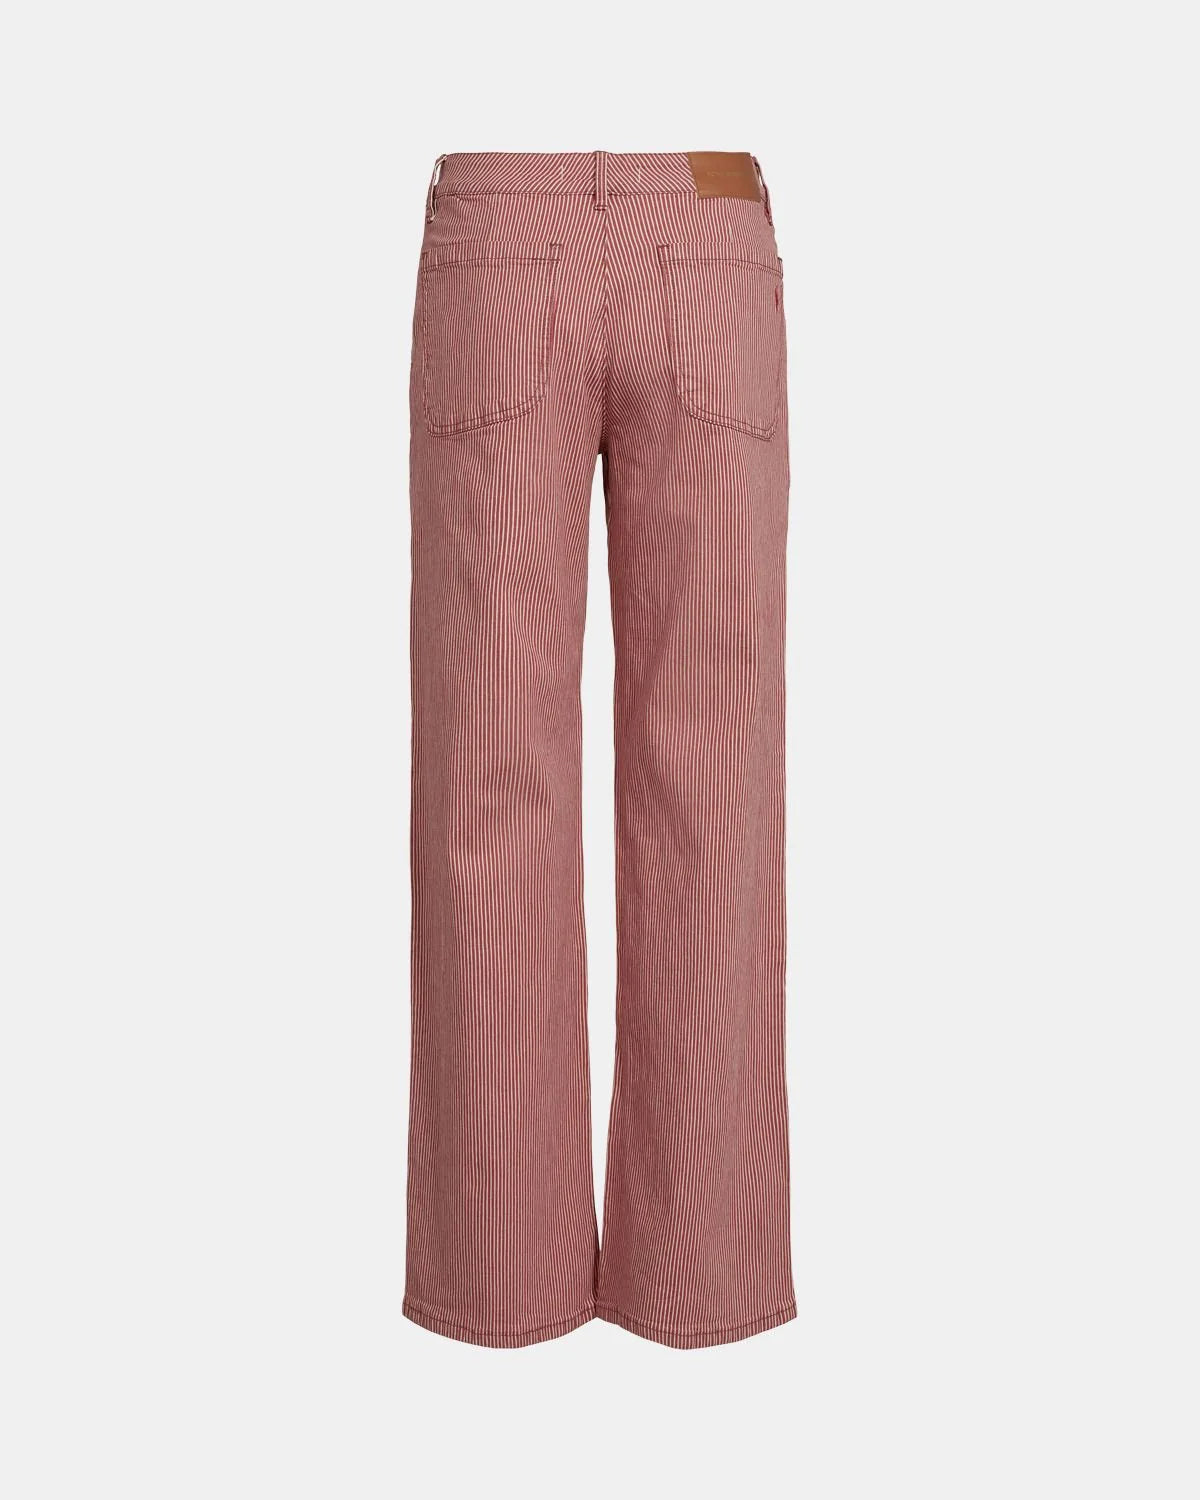 Sofie Schnoor Trousers Red Striped